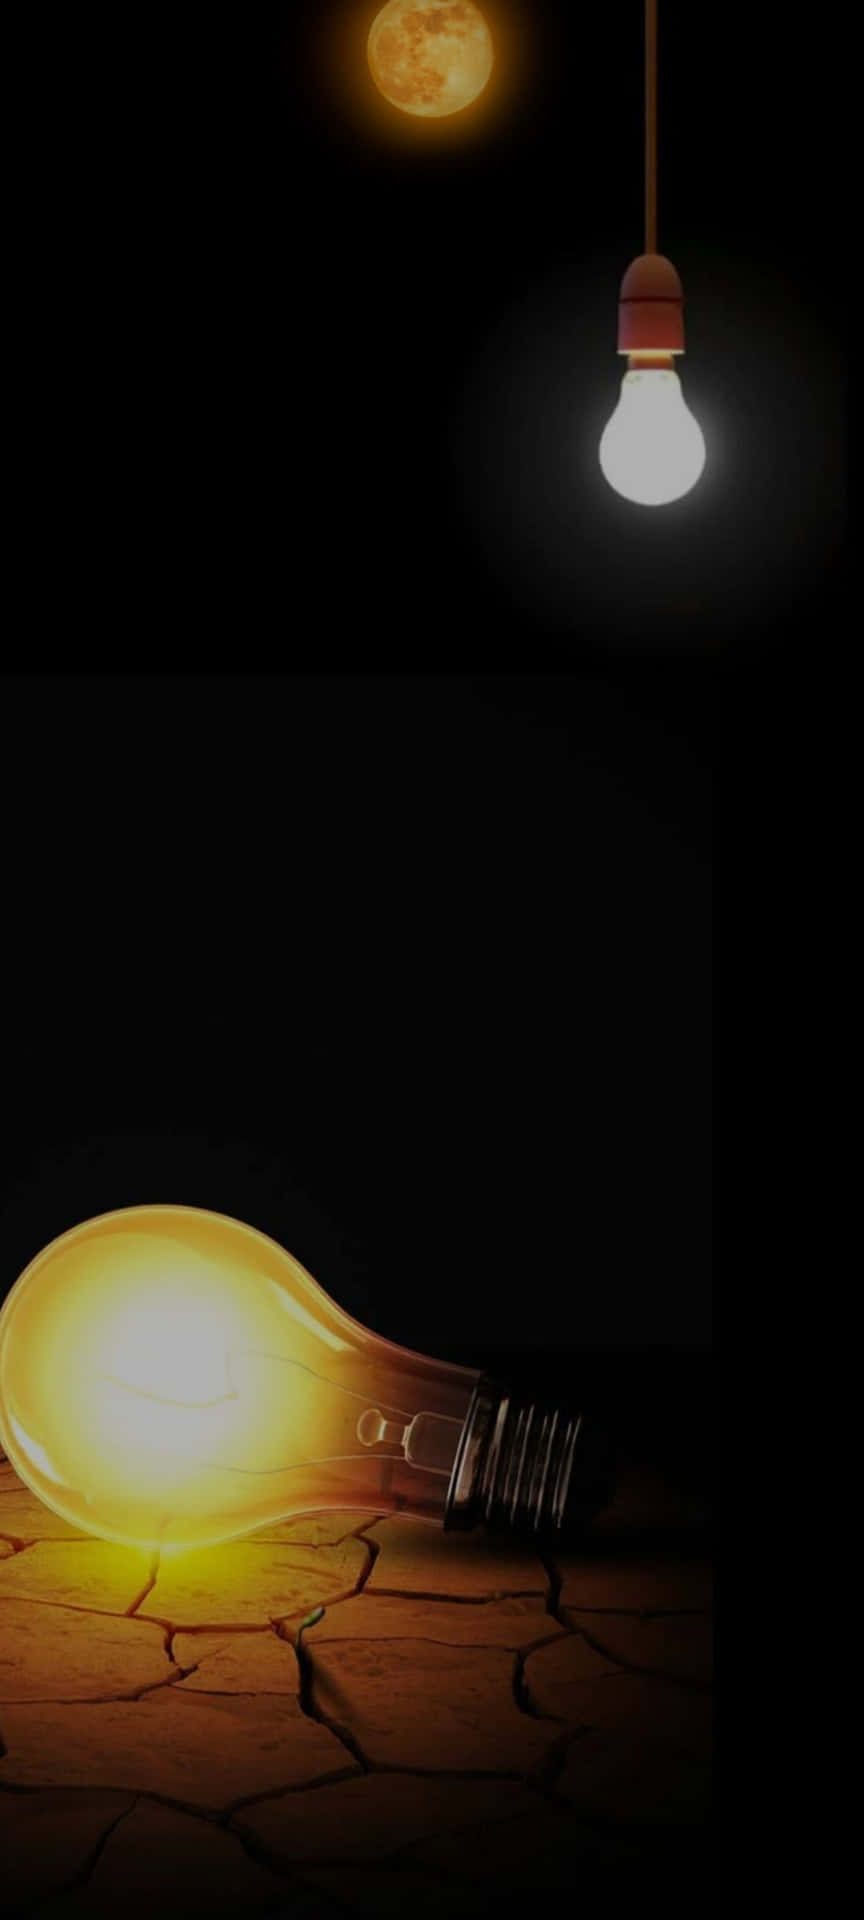 A Light Bulb And A Moon In The Dark Background